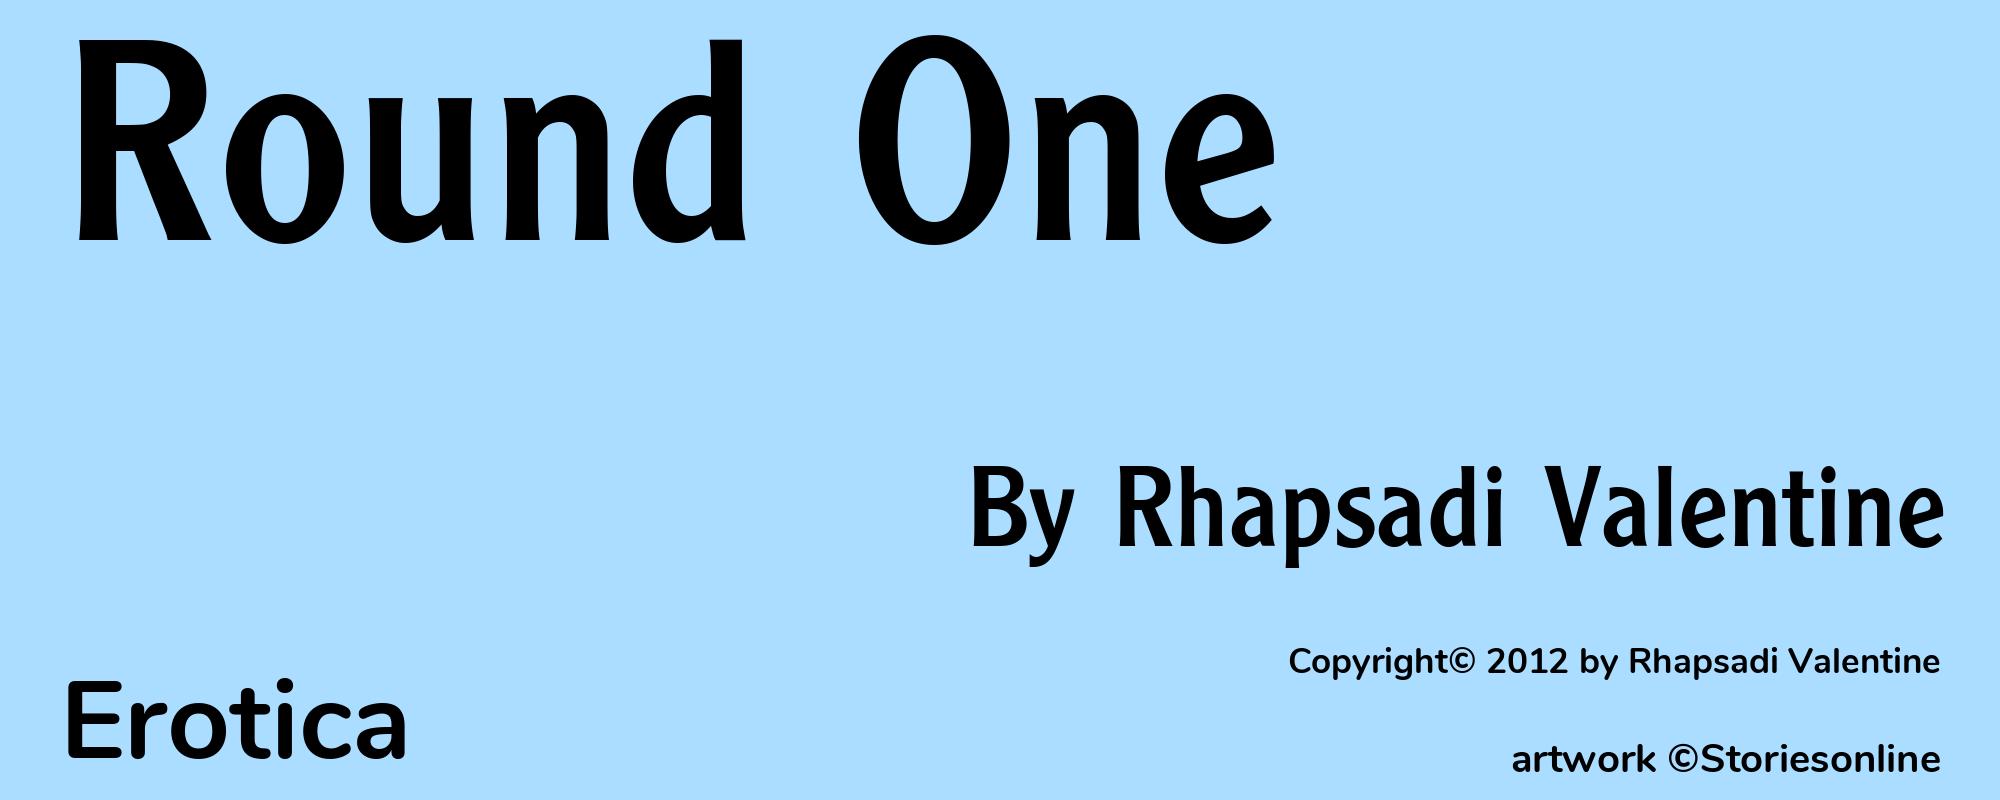 Round One - Cover